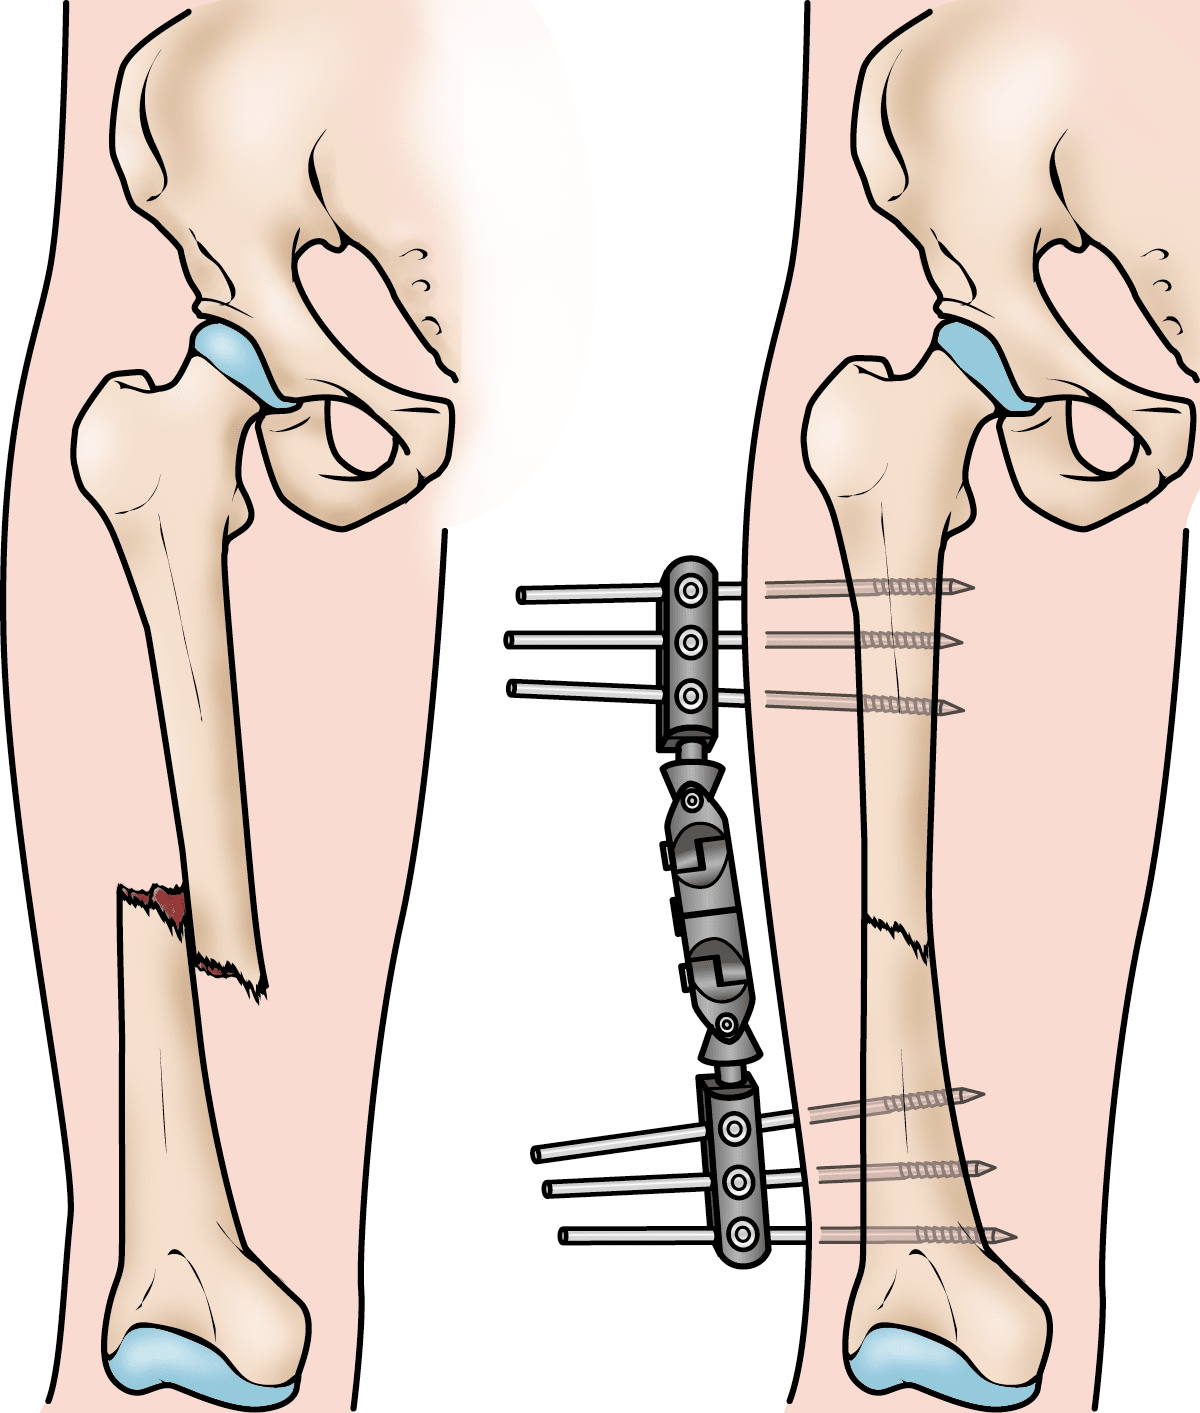 Femur (thighbone) fracture treated with external fixation